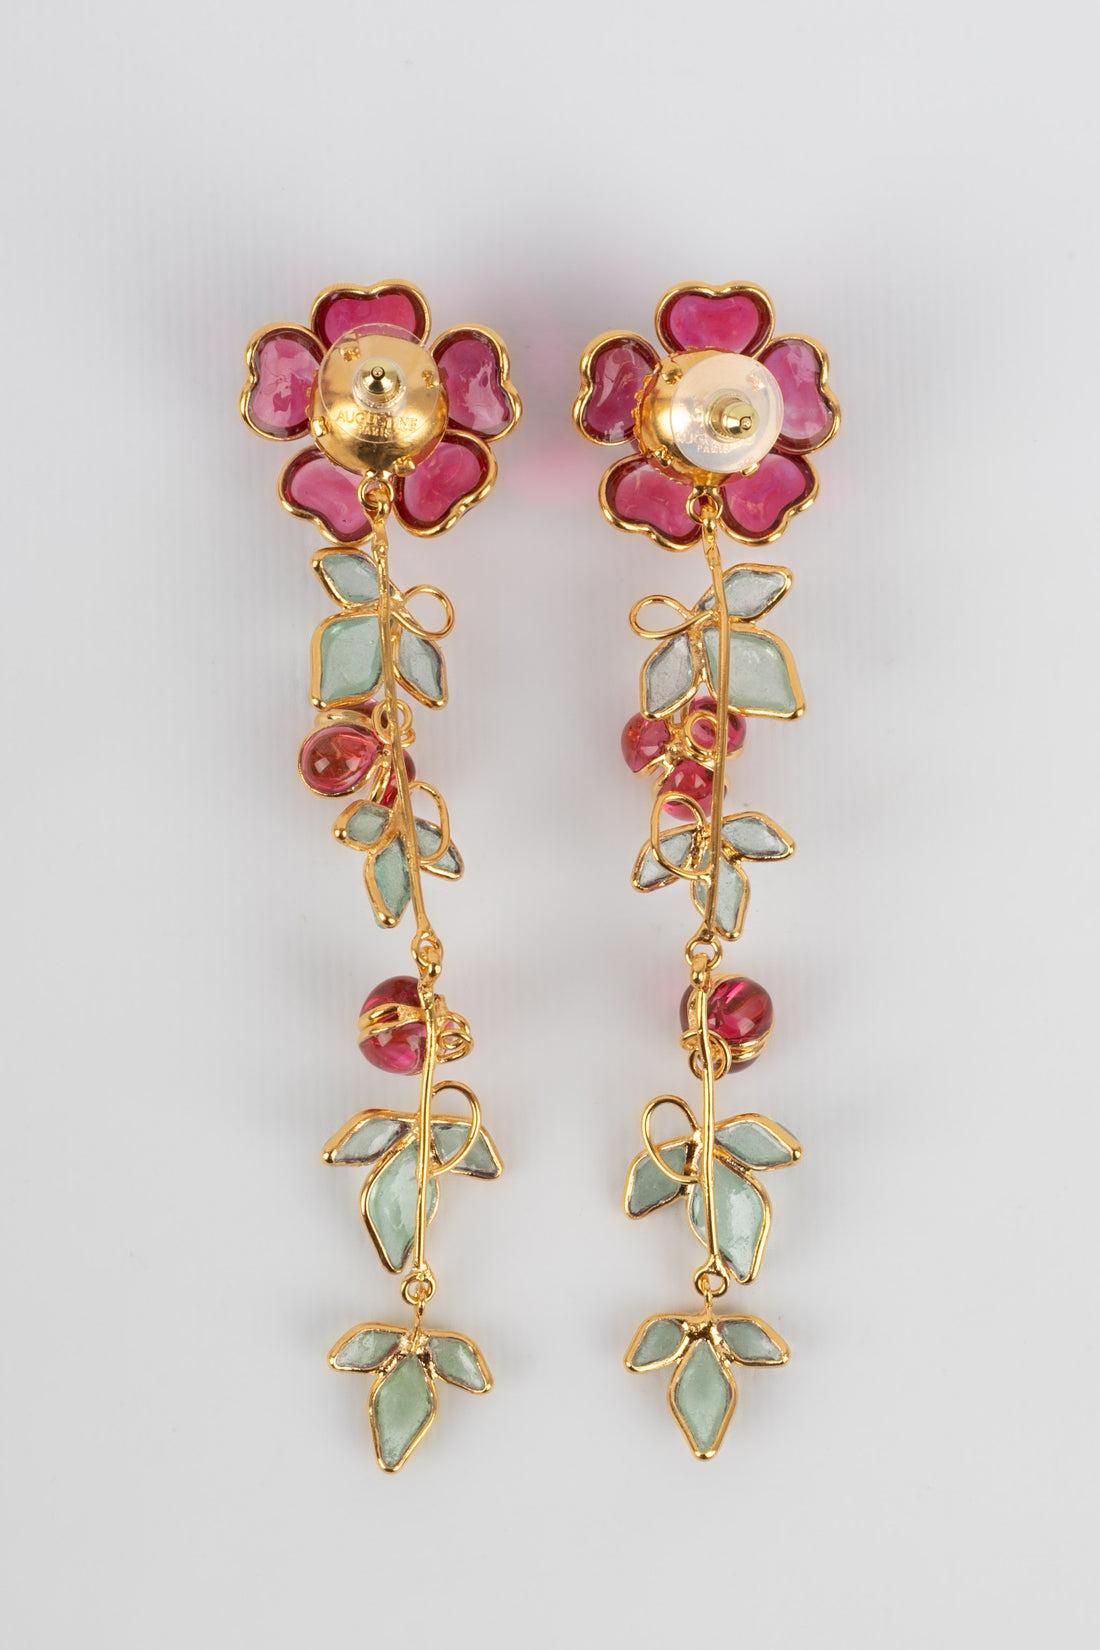 Augustine - Golden metal earrings with glass paste in pink tones.

Additional information:
Condition: Very good condition
Dimensions: Length: 12.5 cm

Seller Reference: BO226